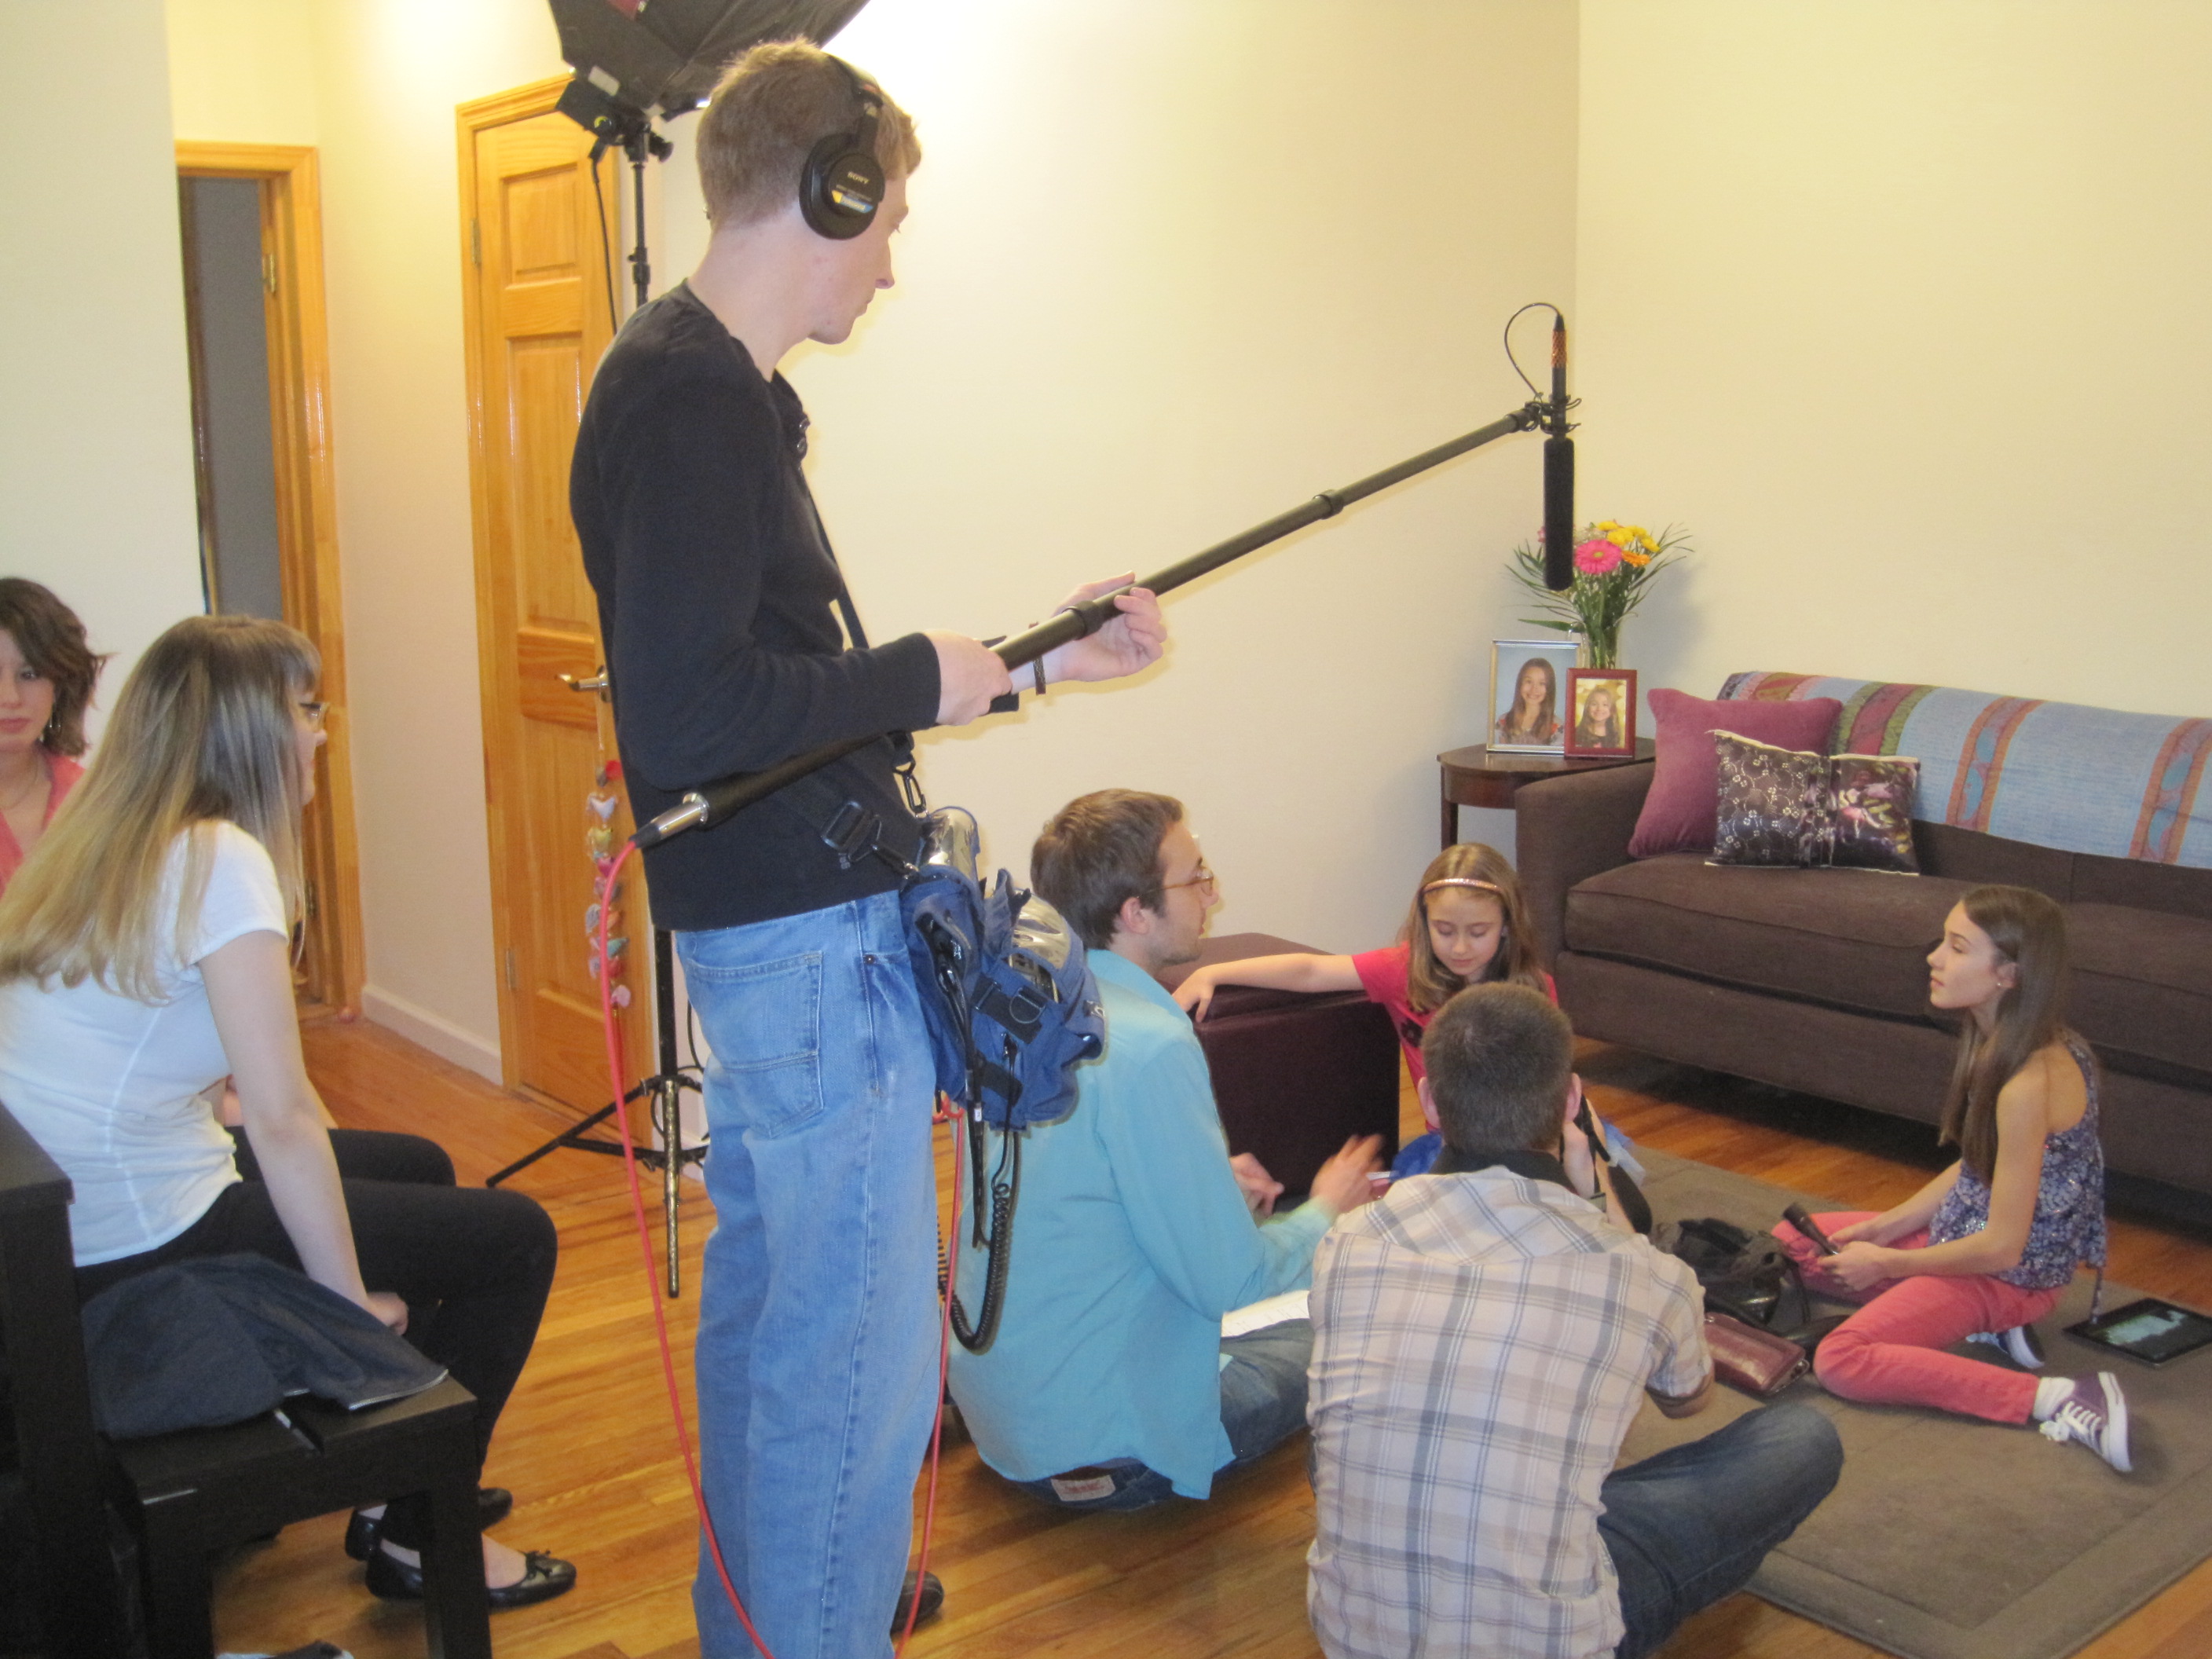 Kylie with director Tim Young, Jason Johnson on camera & Jesse Flaitz on sound --- filming the webseries Sitting on Babies.